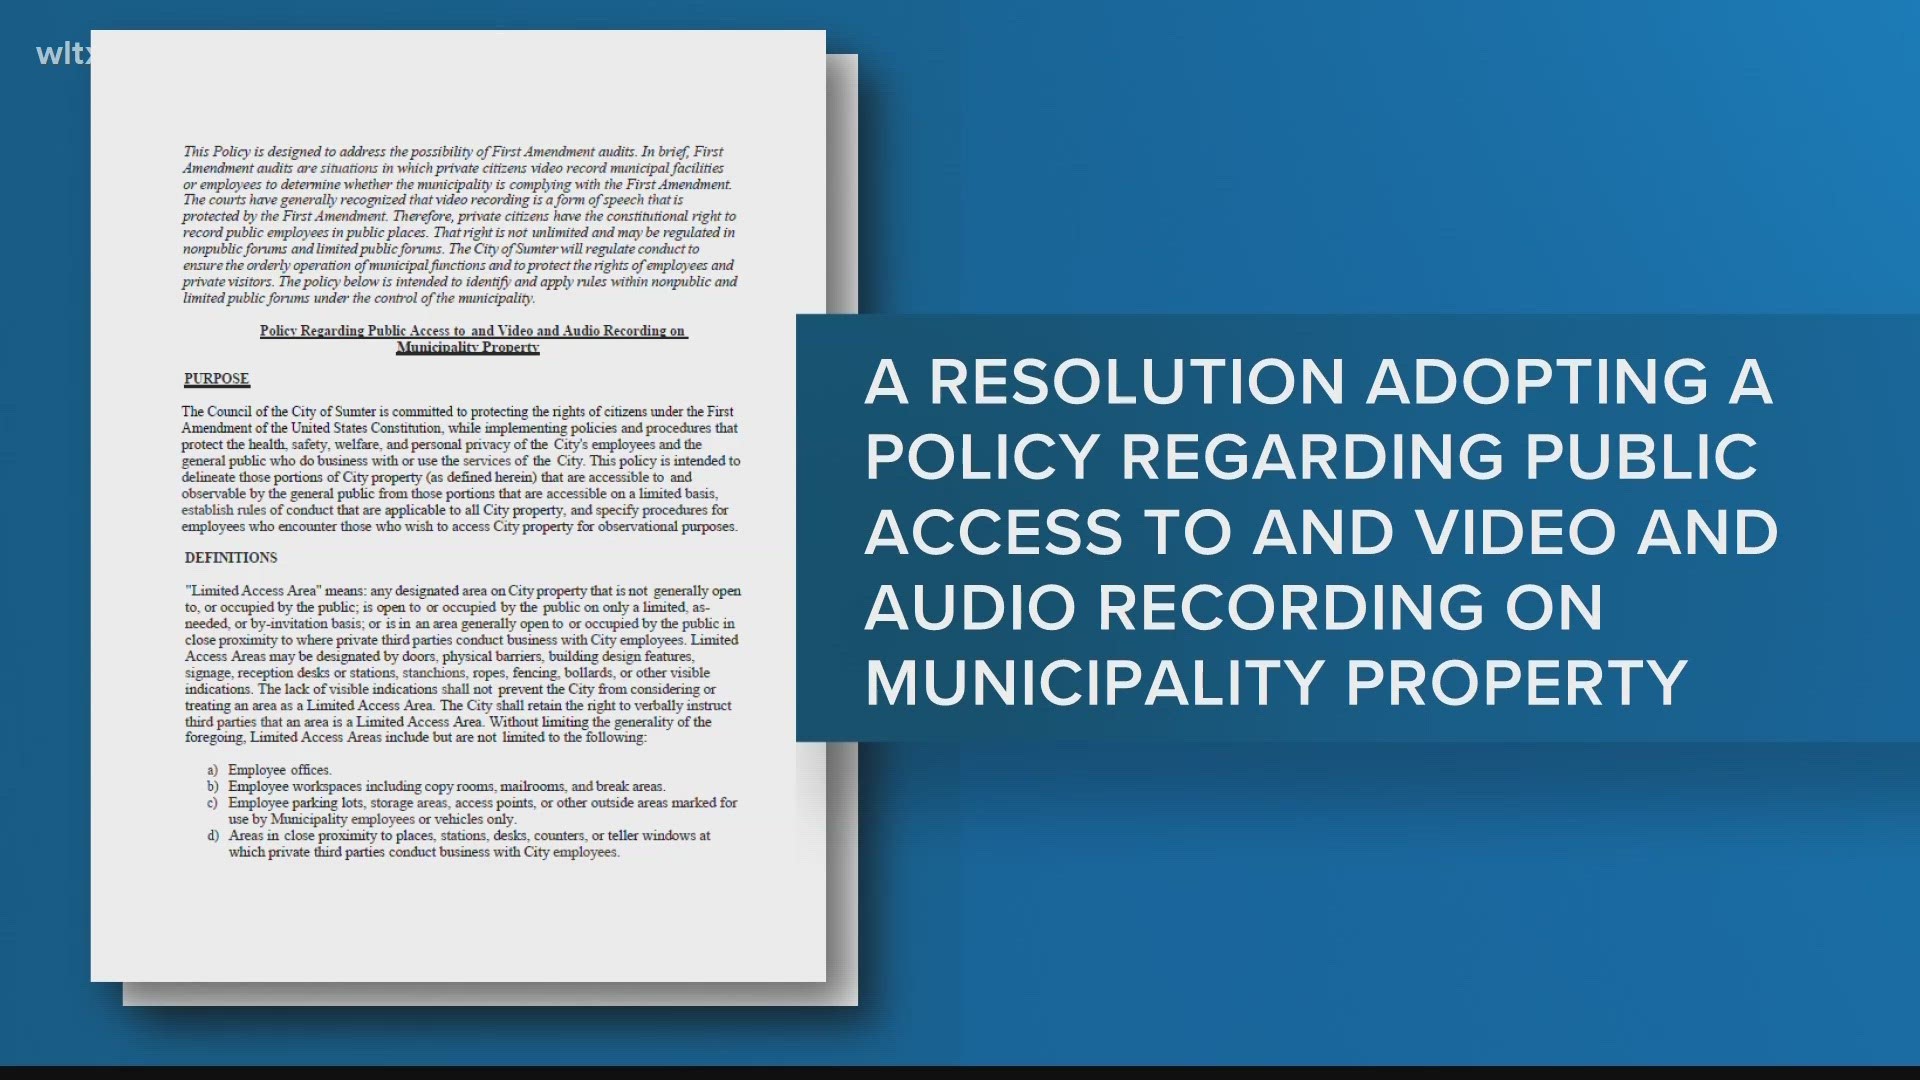 Sumter City Council passed Resolution No. 911, which adopts a policy regarding public access to and video/audio recording on municipality property.